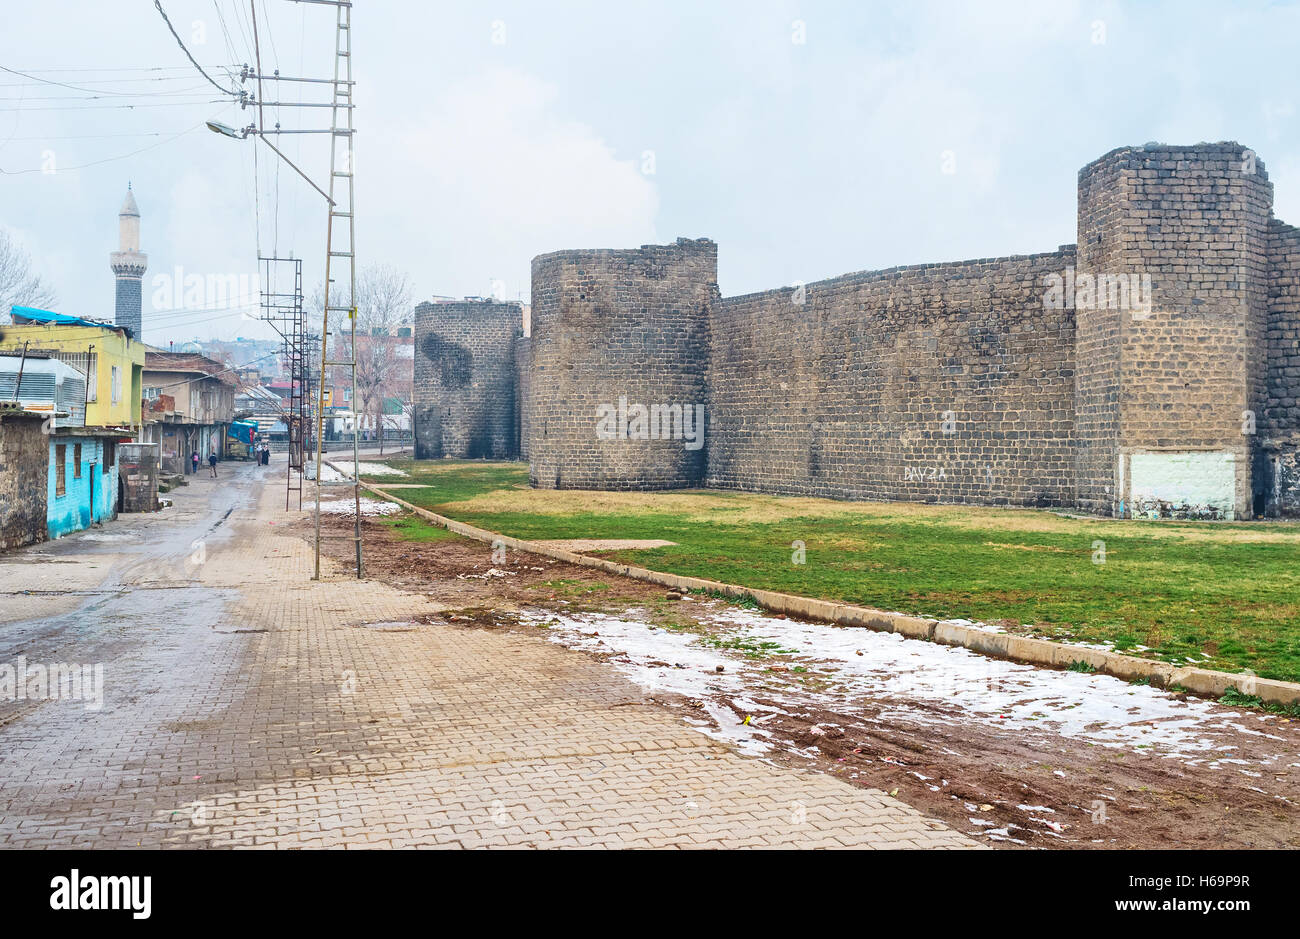 The  black citadel wall surrounds the old town with the small colorful houses and numerous mosques Stock Photo